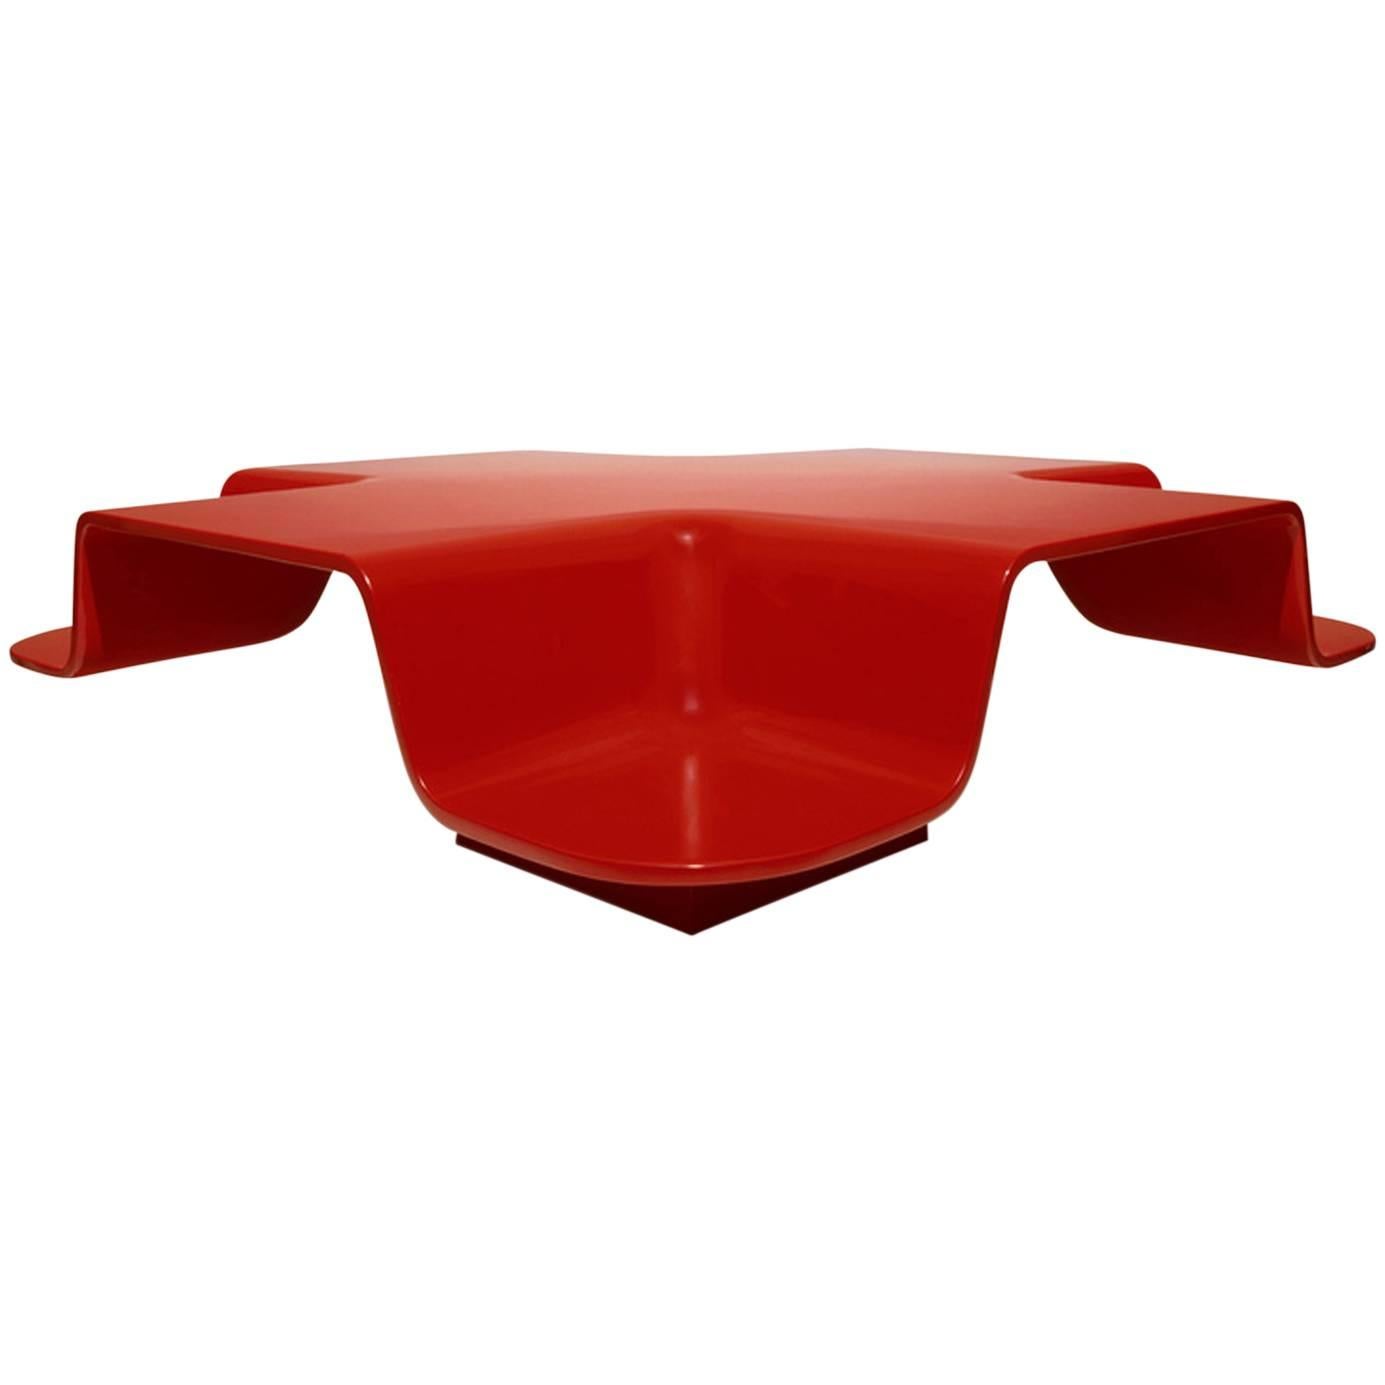 Fiberglass Table, Hand Molded and Painted in Ferrari Red Lacquer, Contemporary For Sale